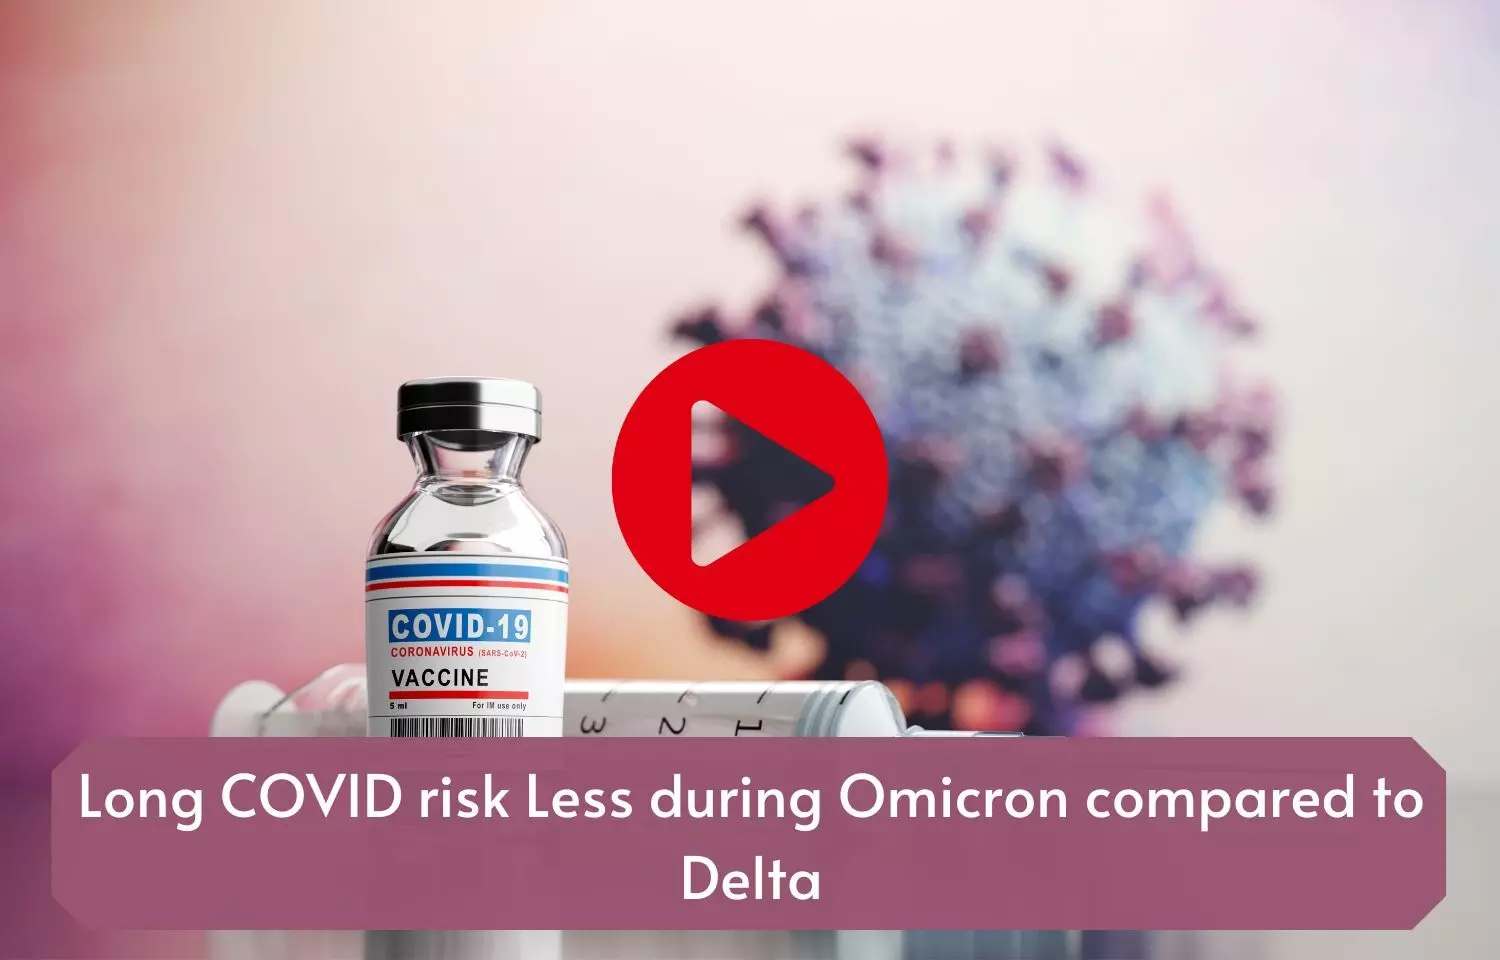 Long COVID risk Less during Omicron compared to Delta